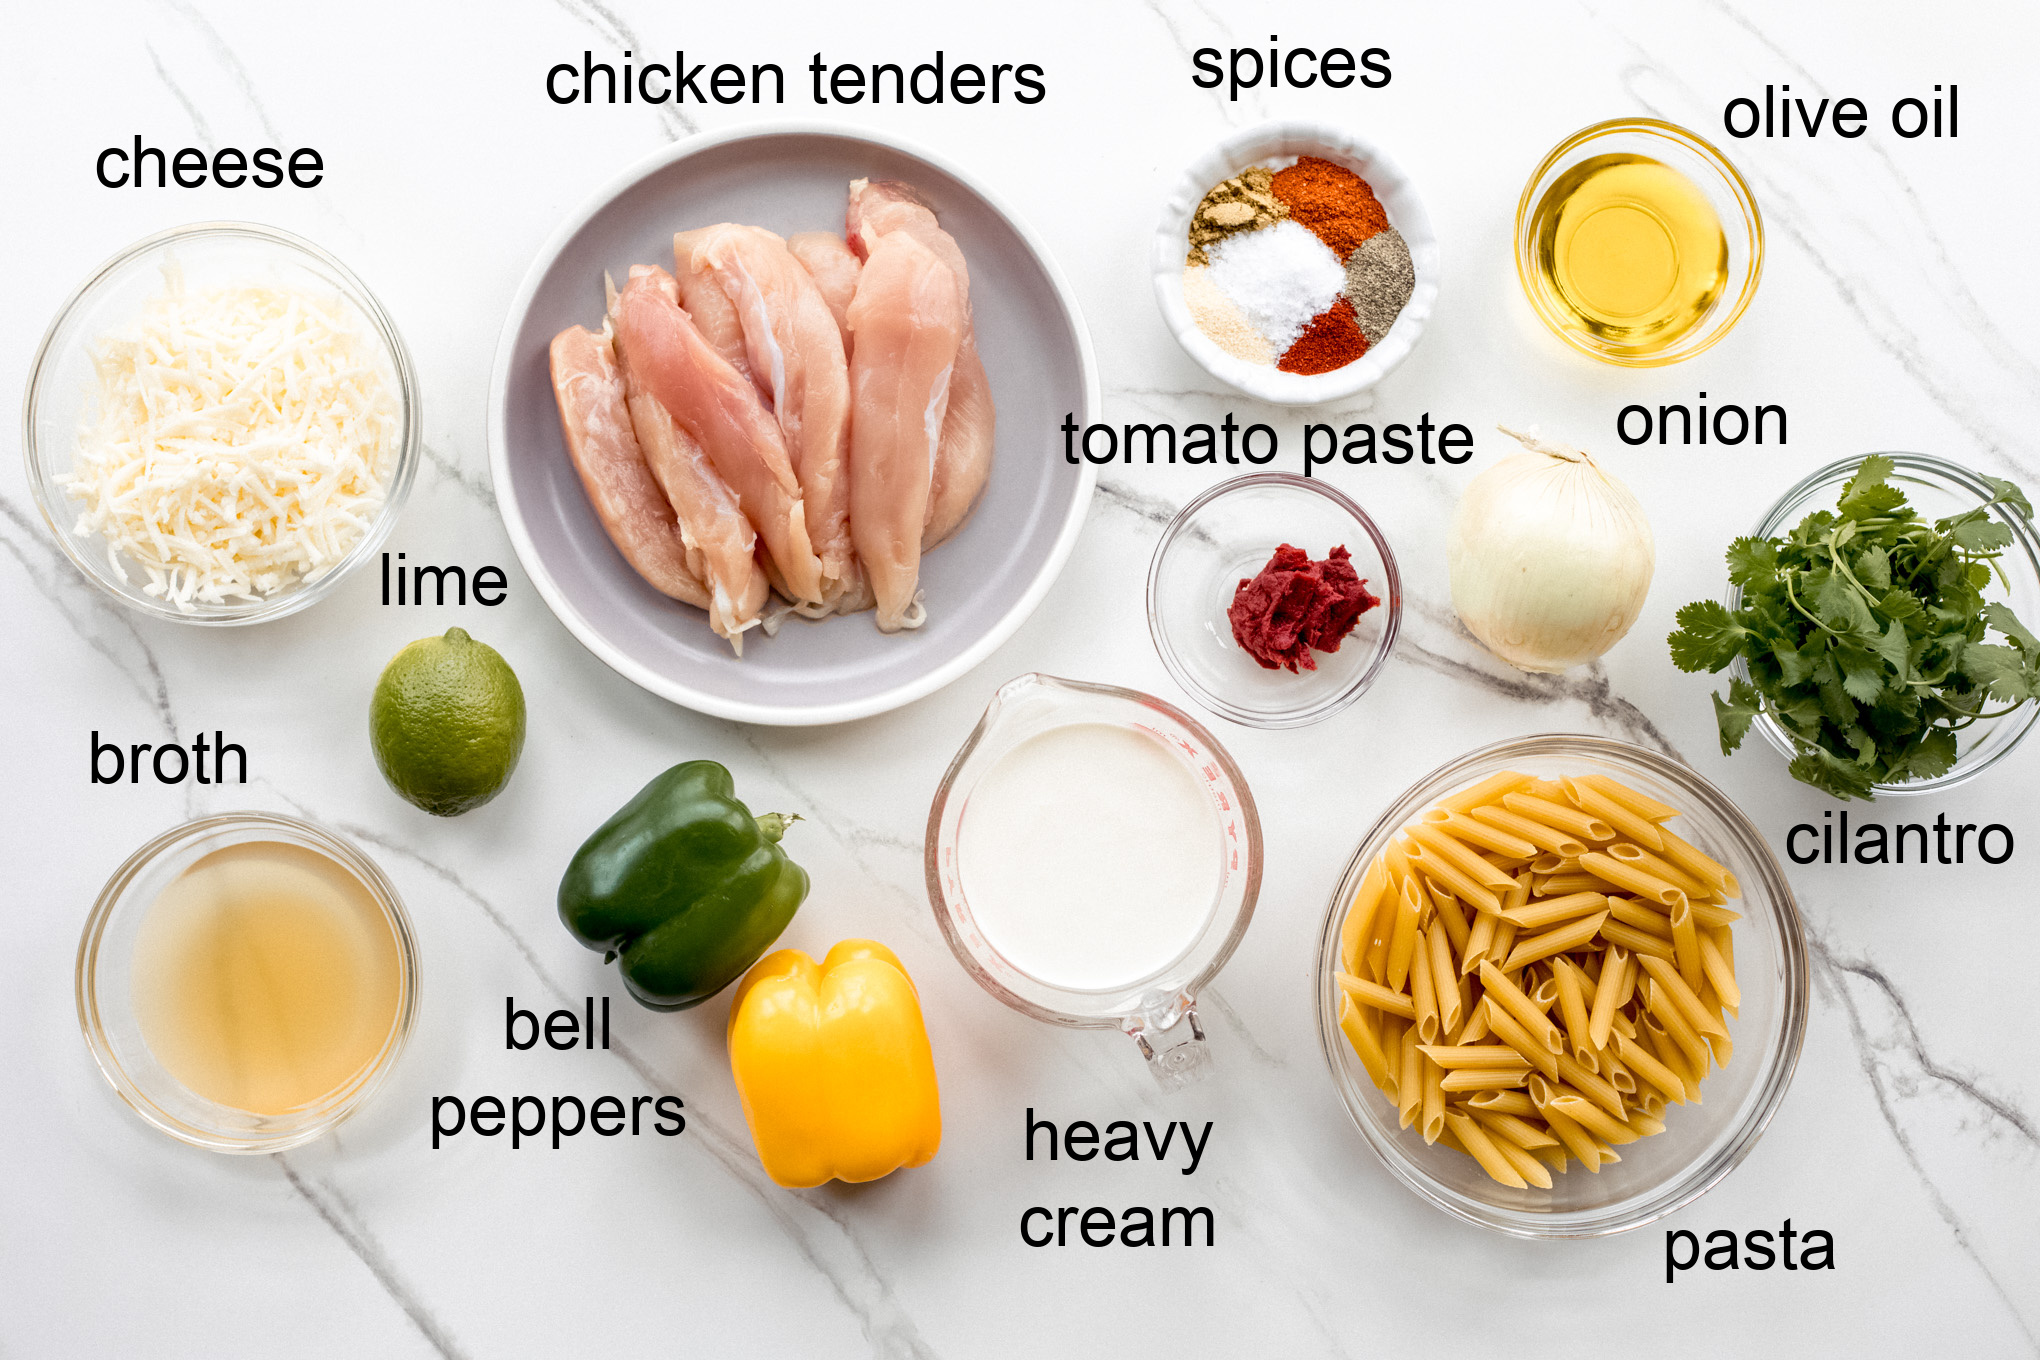 ingredients for chicken pasta with peppers.